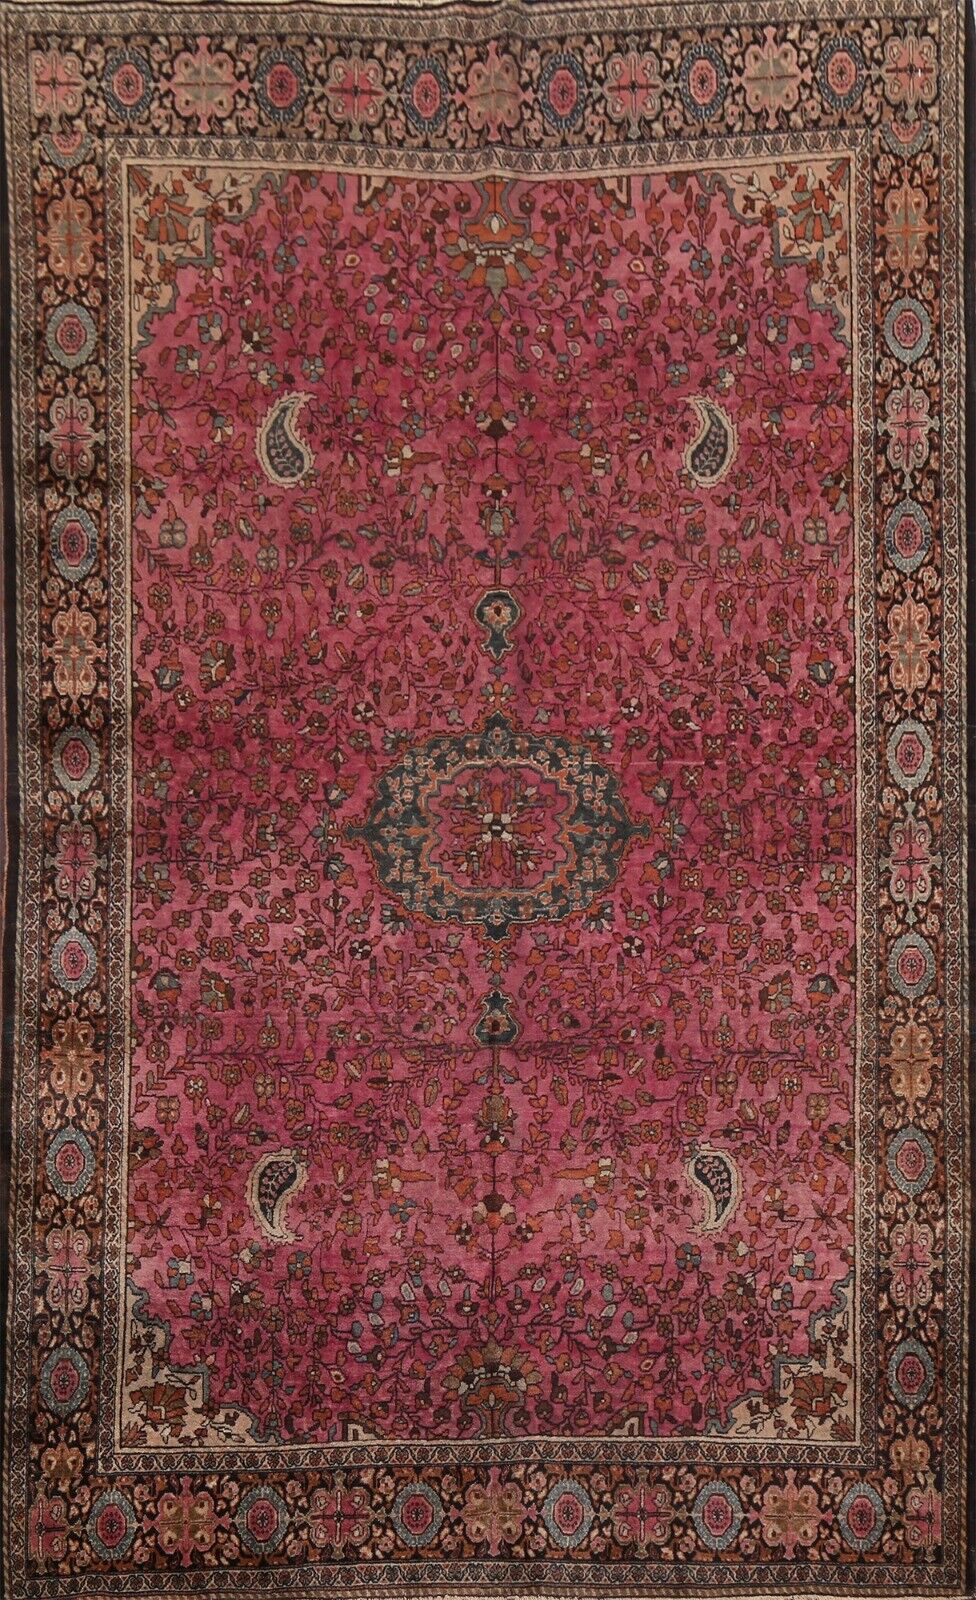 Black Friday Deal Antique Sarouk Vegetable Dye Floral Hand-knotted Area Rug 4x7